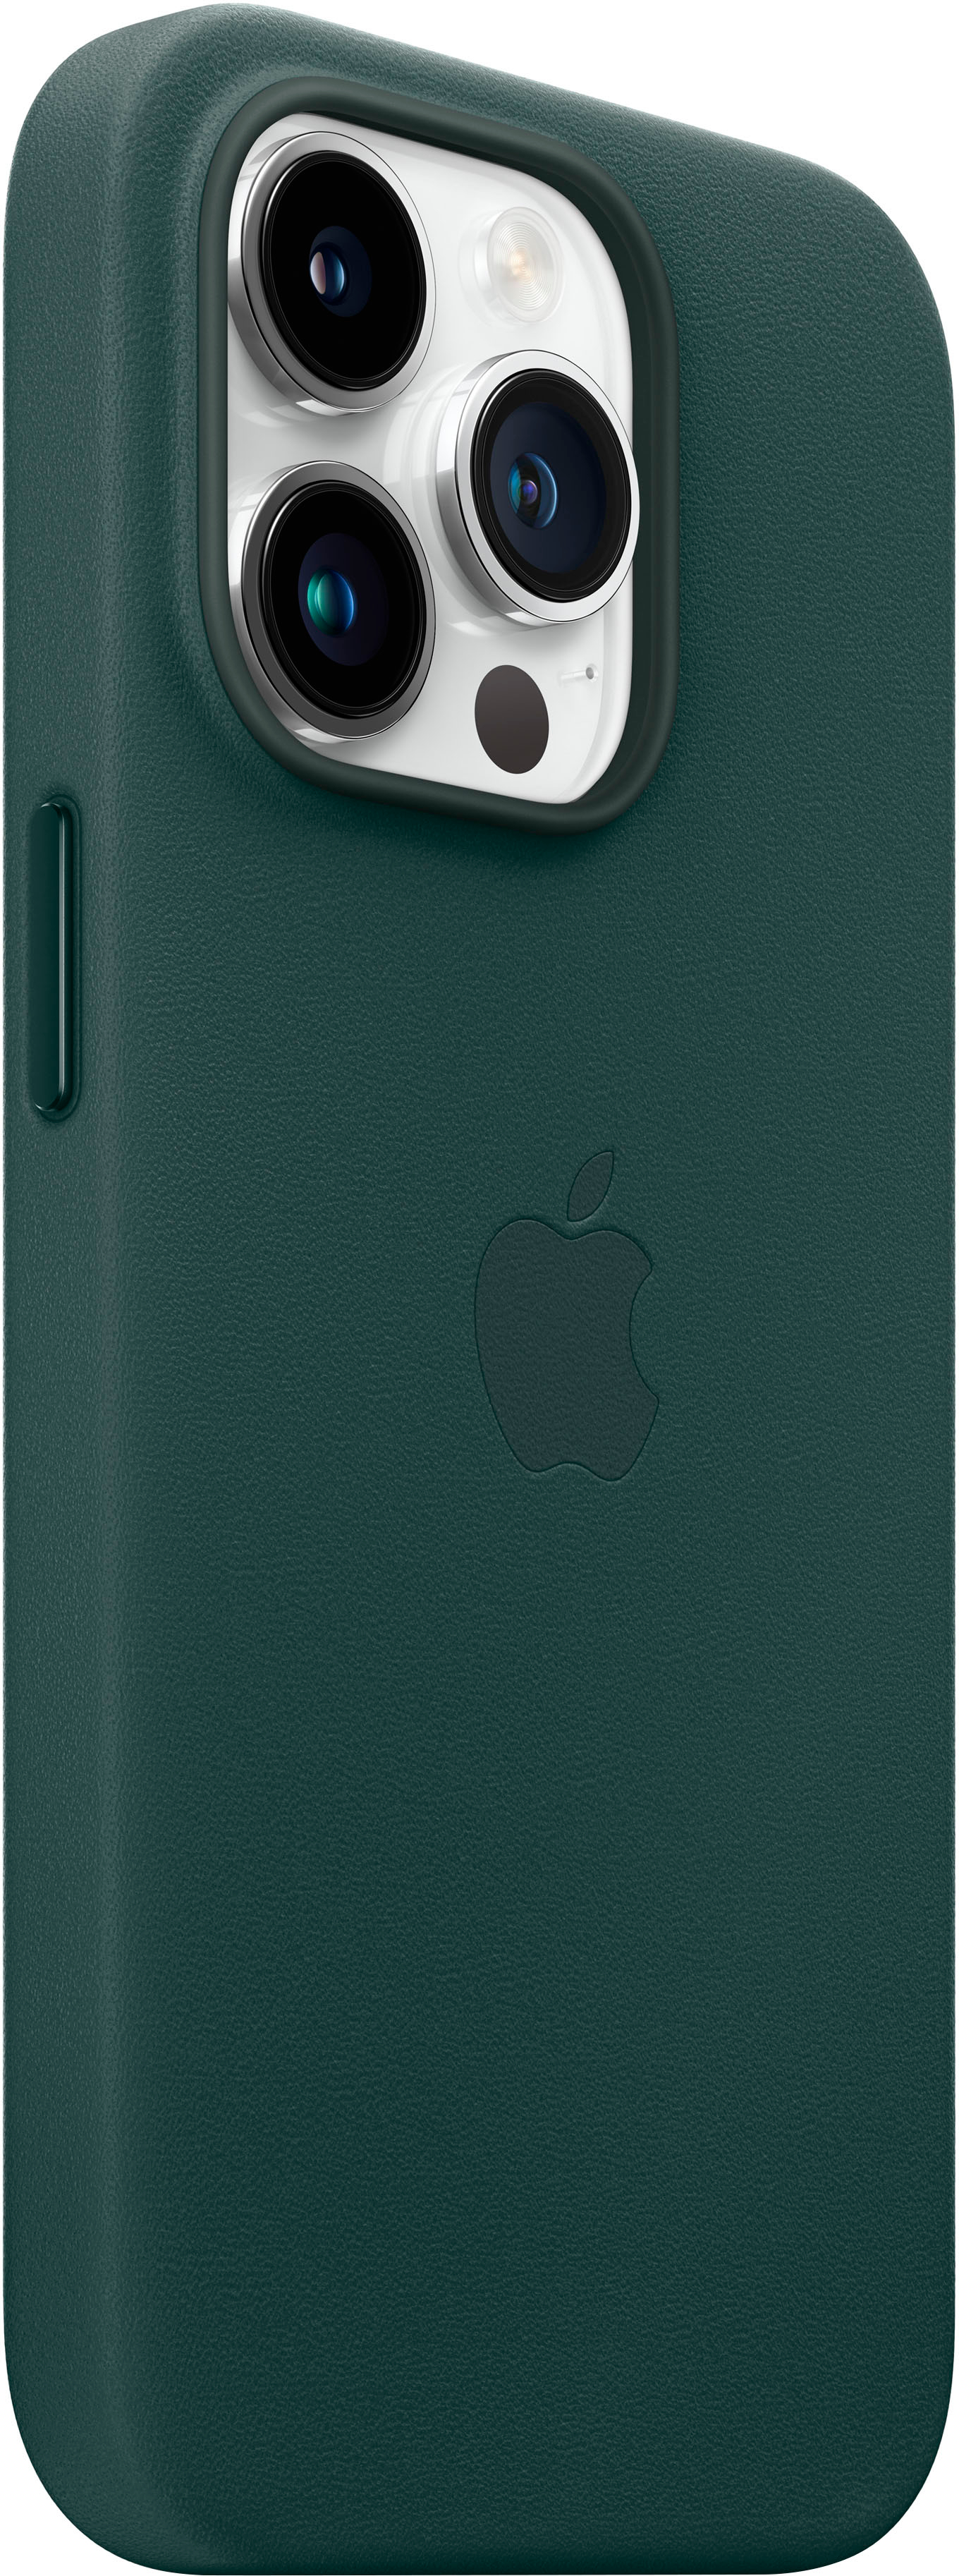 Apple iPhone Leather MagSafe Wallet Green for Sale in Long Beach